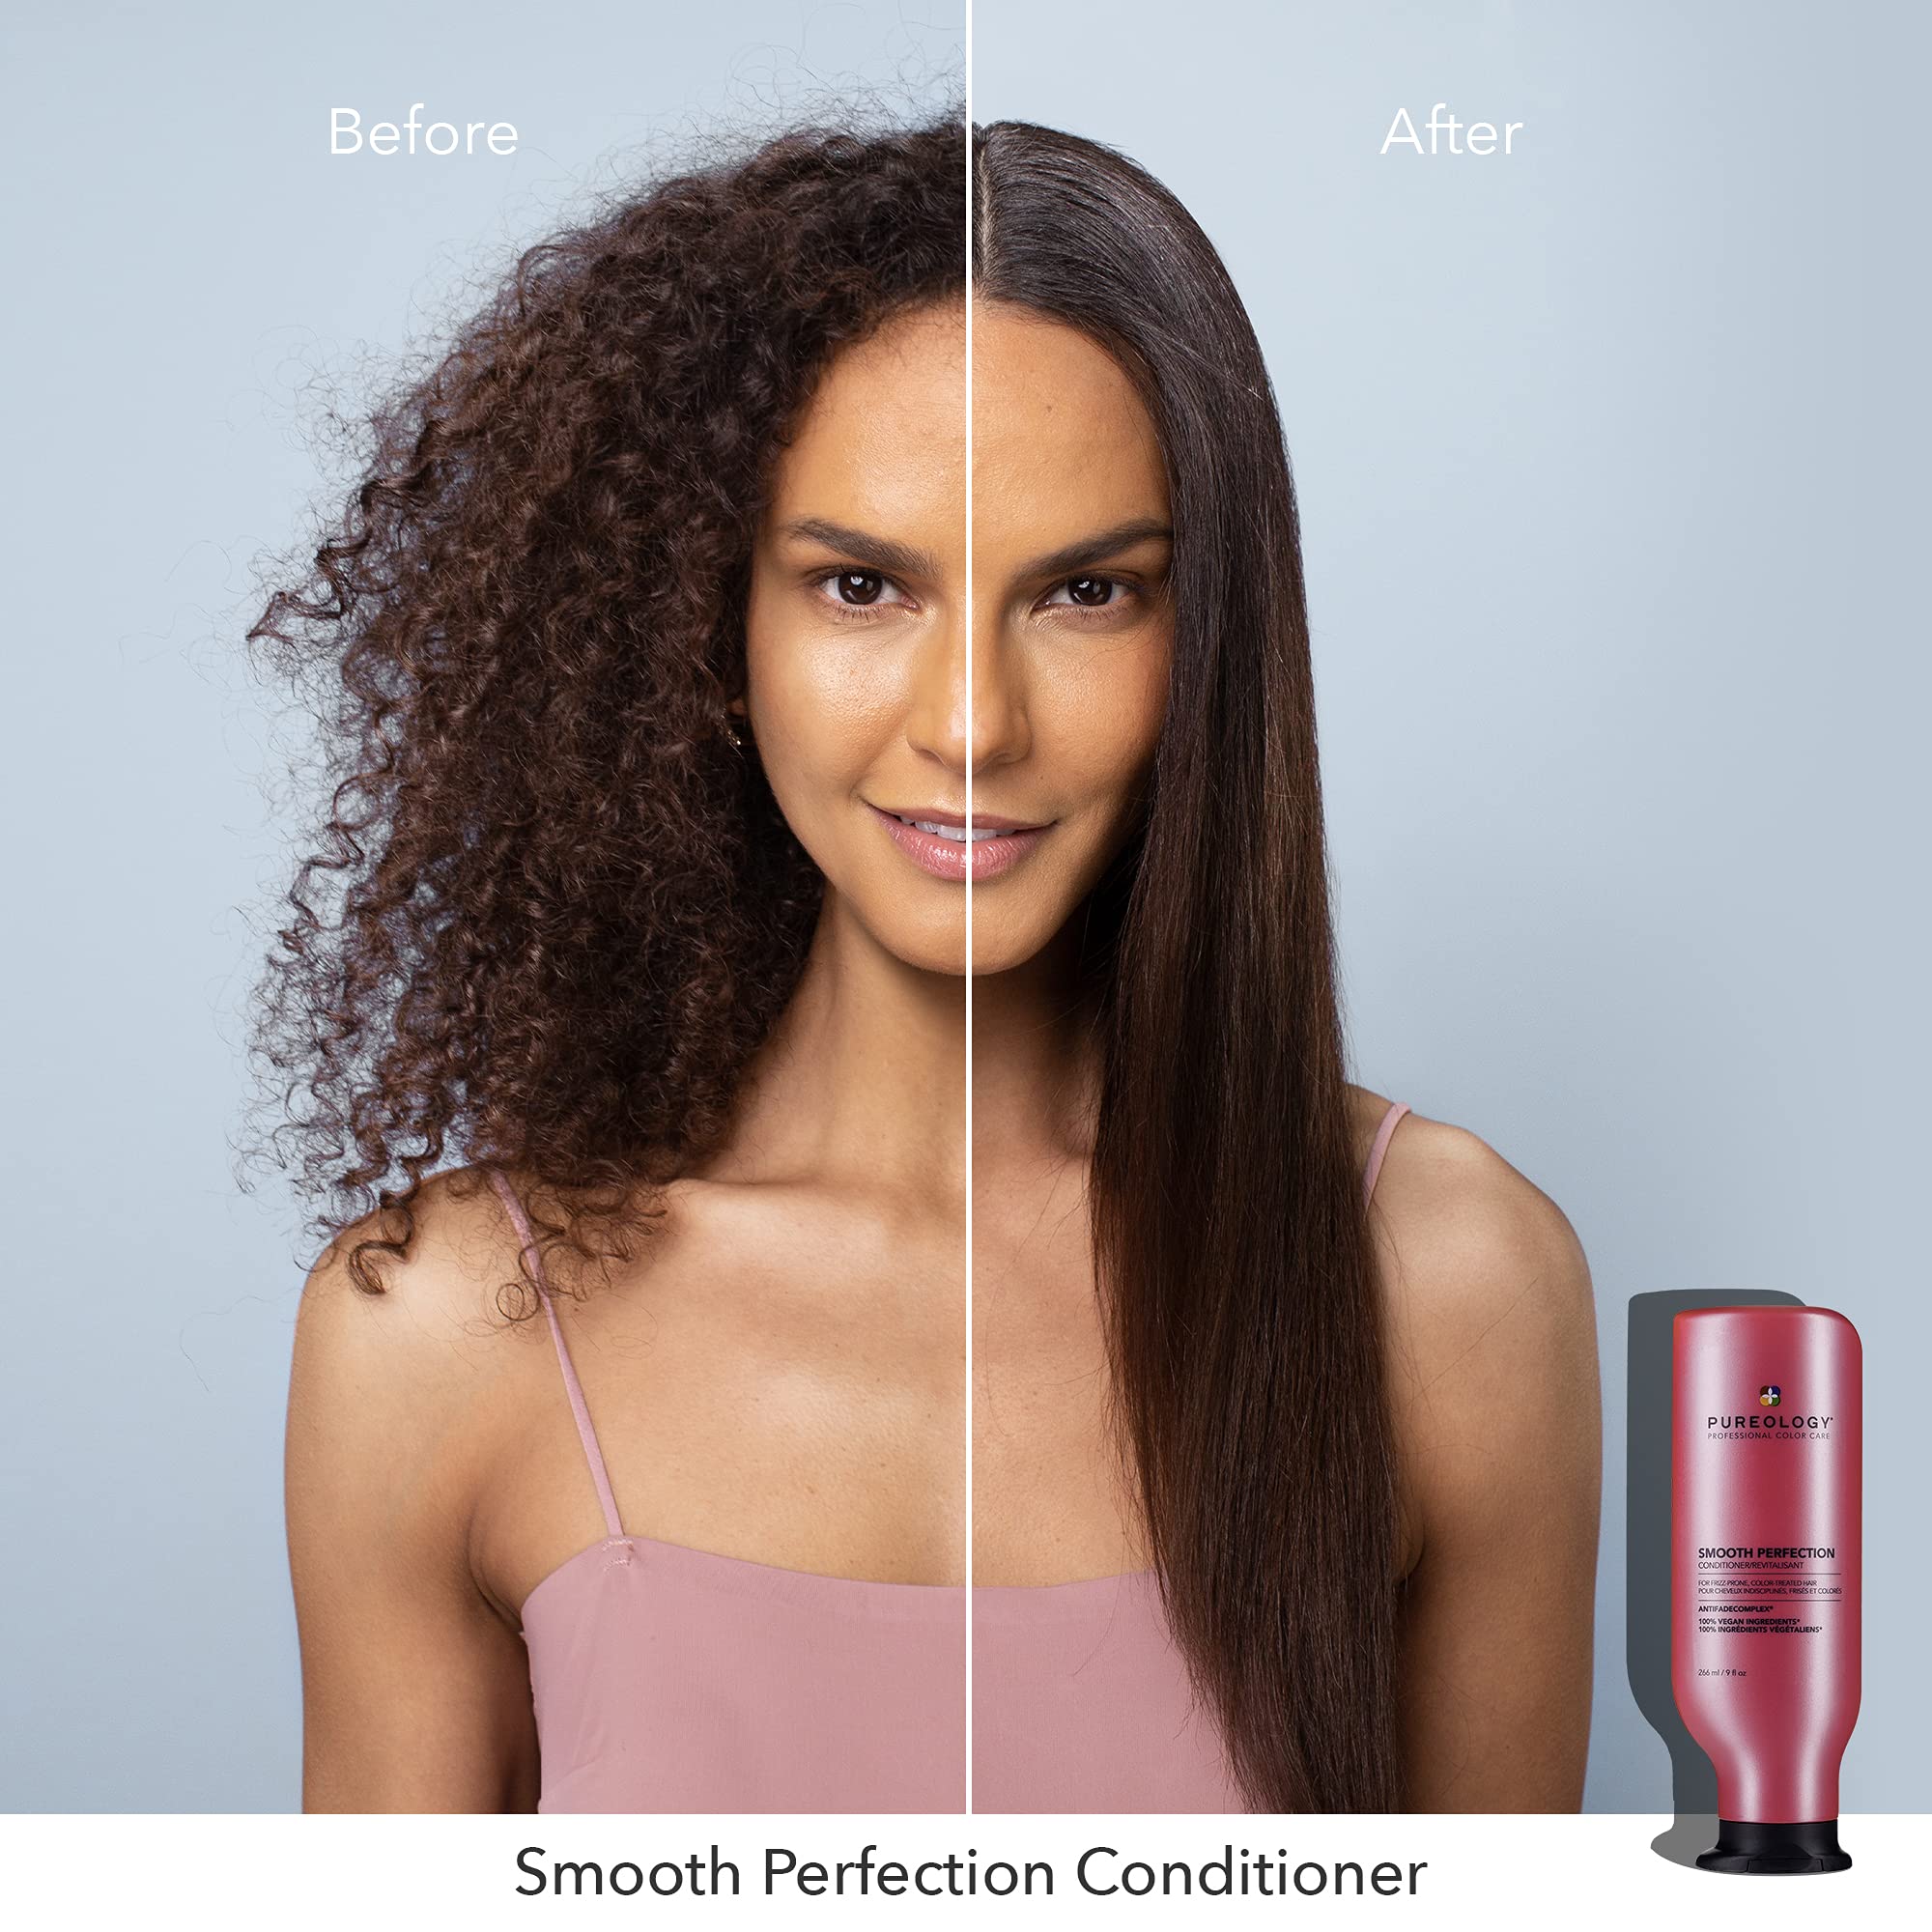 Pureology Smooth Perfection Anti Frizz Shampoo and Conditioner Set | Smooths Hair & Color Safe | Sulfate-Free | Vegan | Paraben-Free